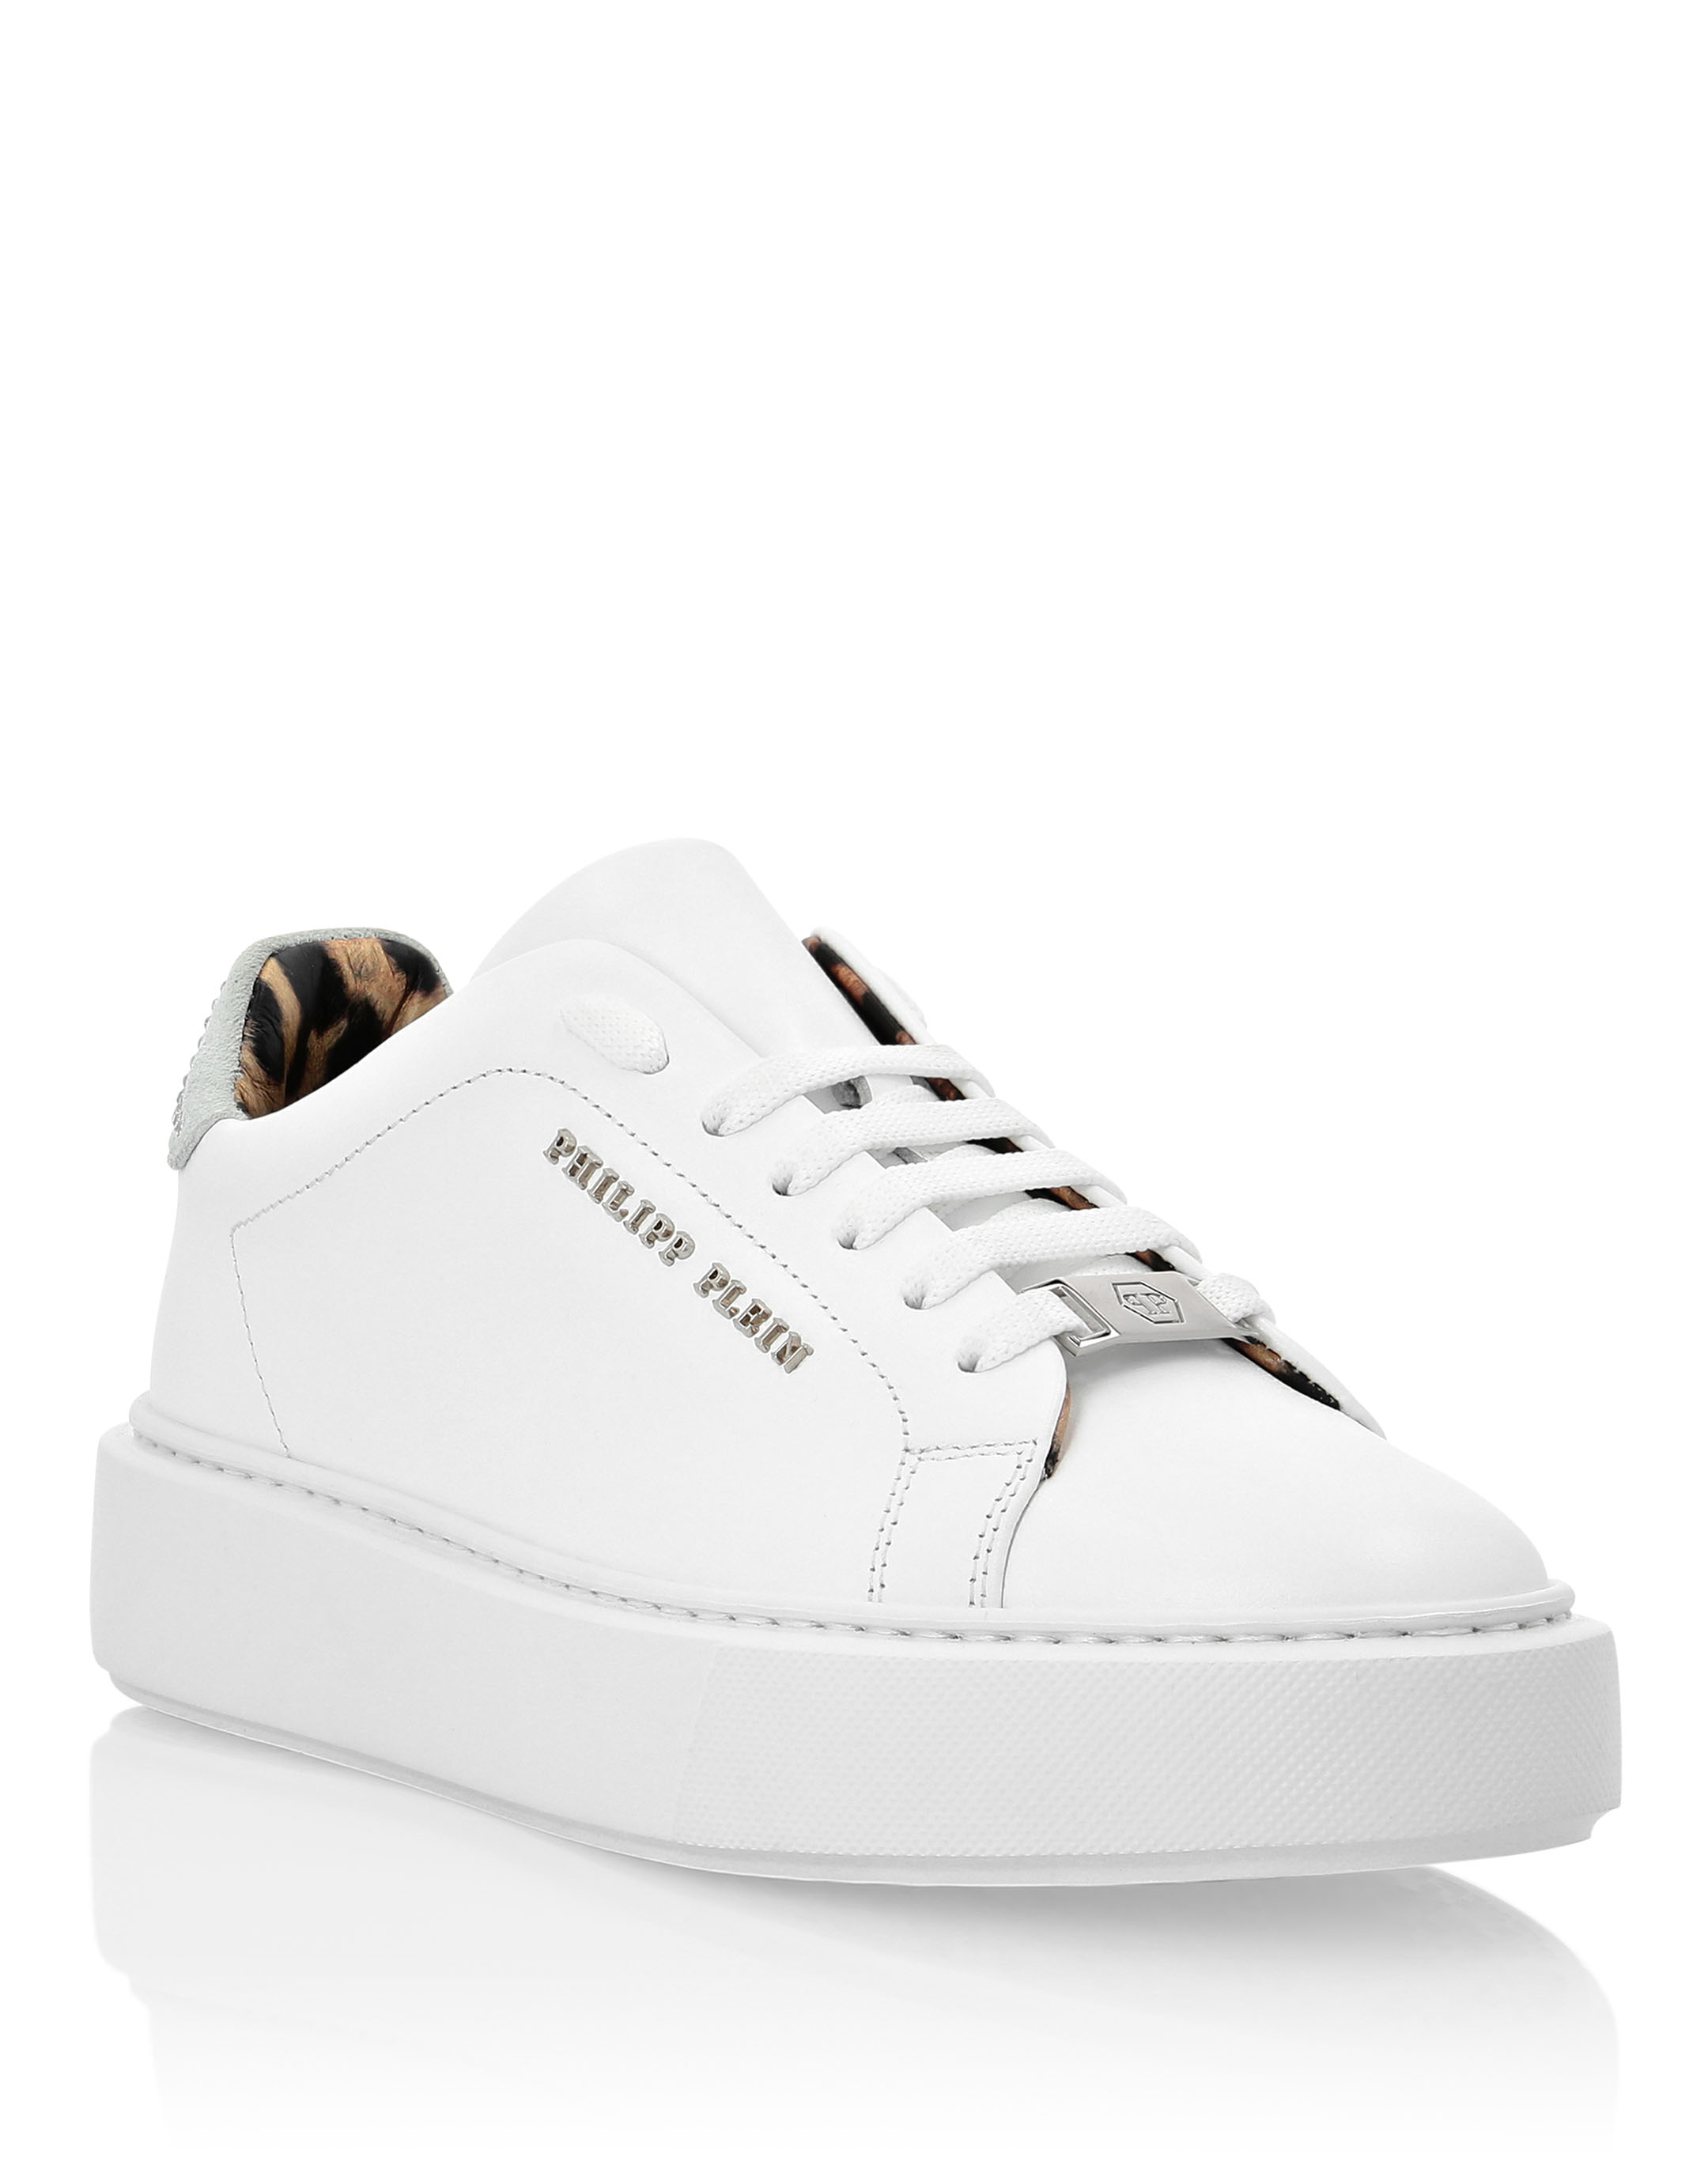 Lo-Top Sneakers leather | Philipp Plein Outlet